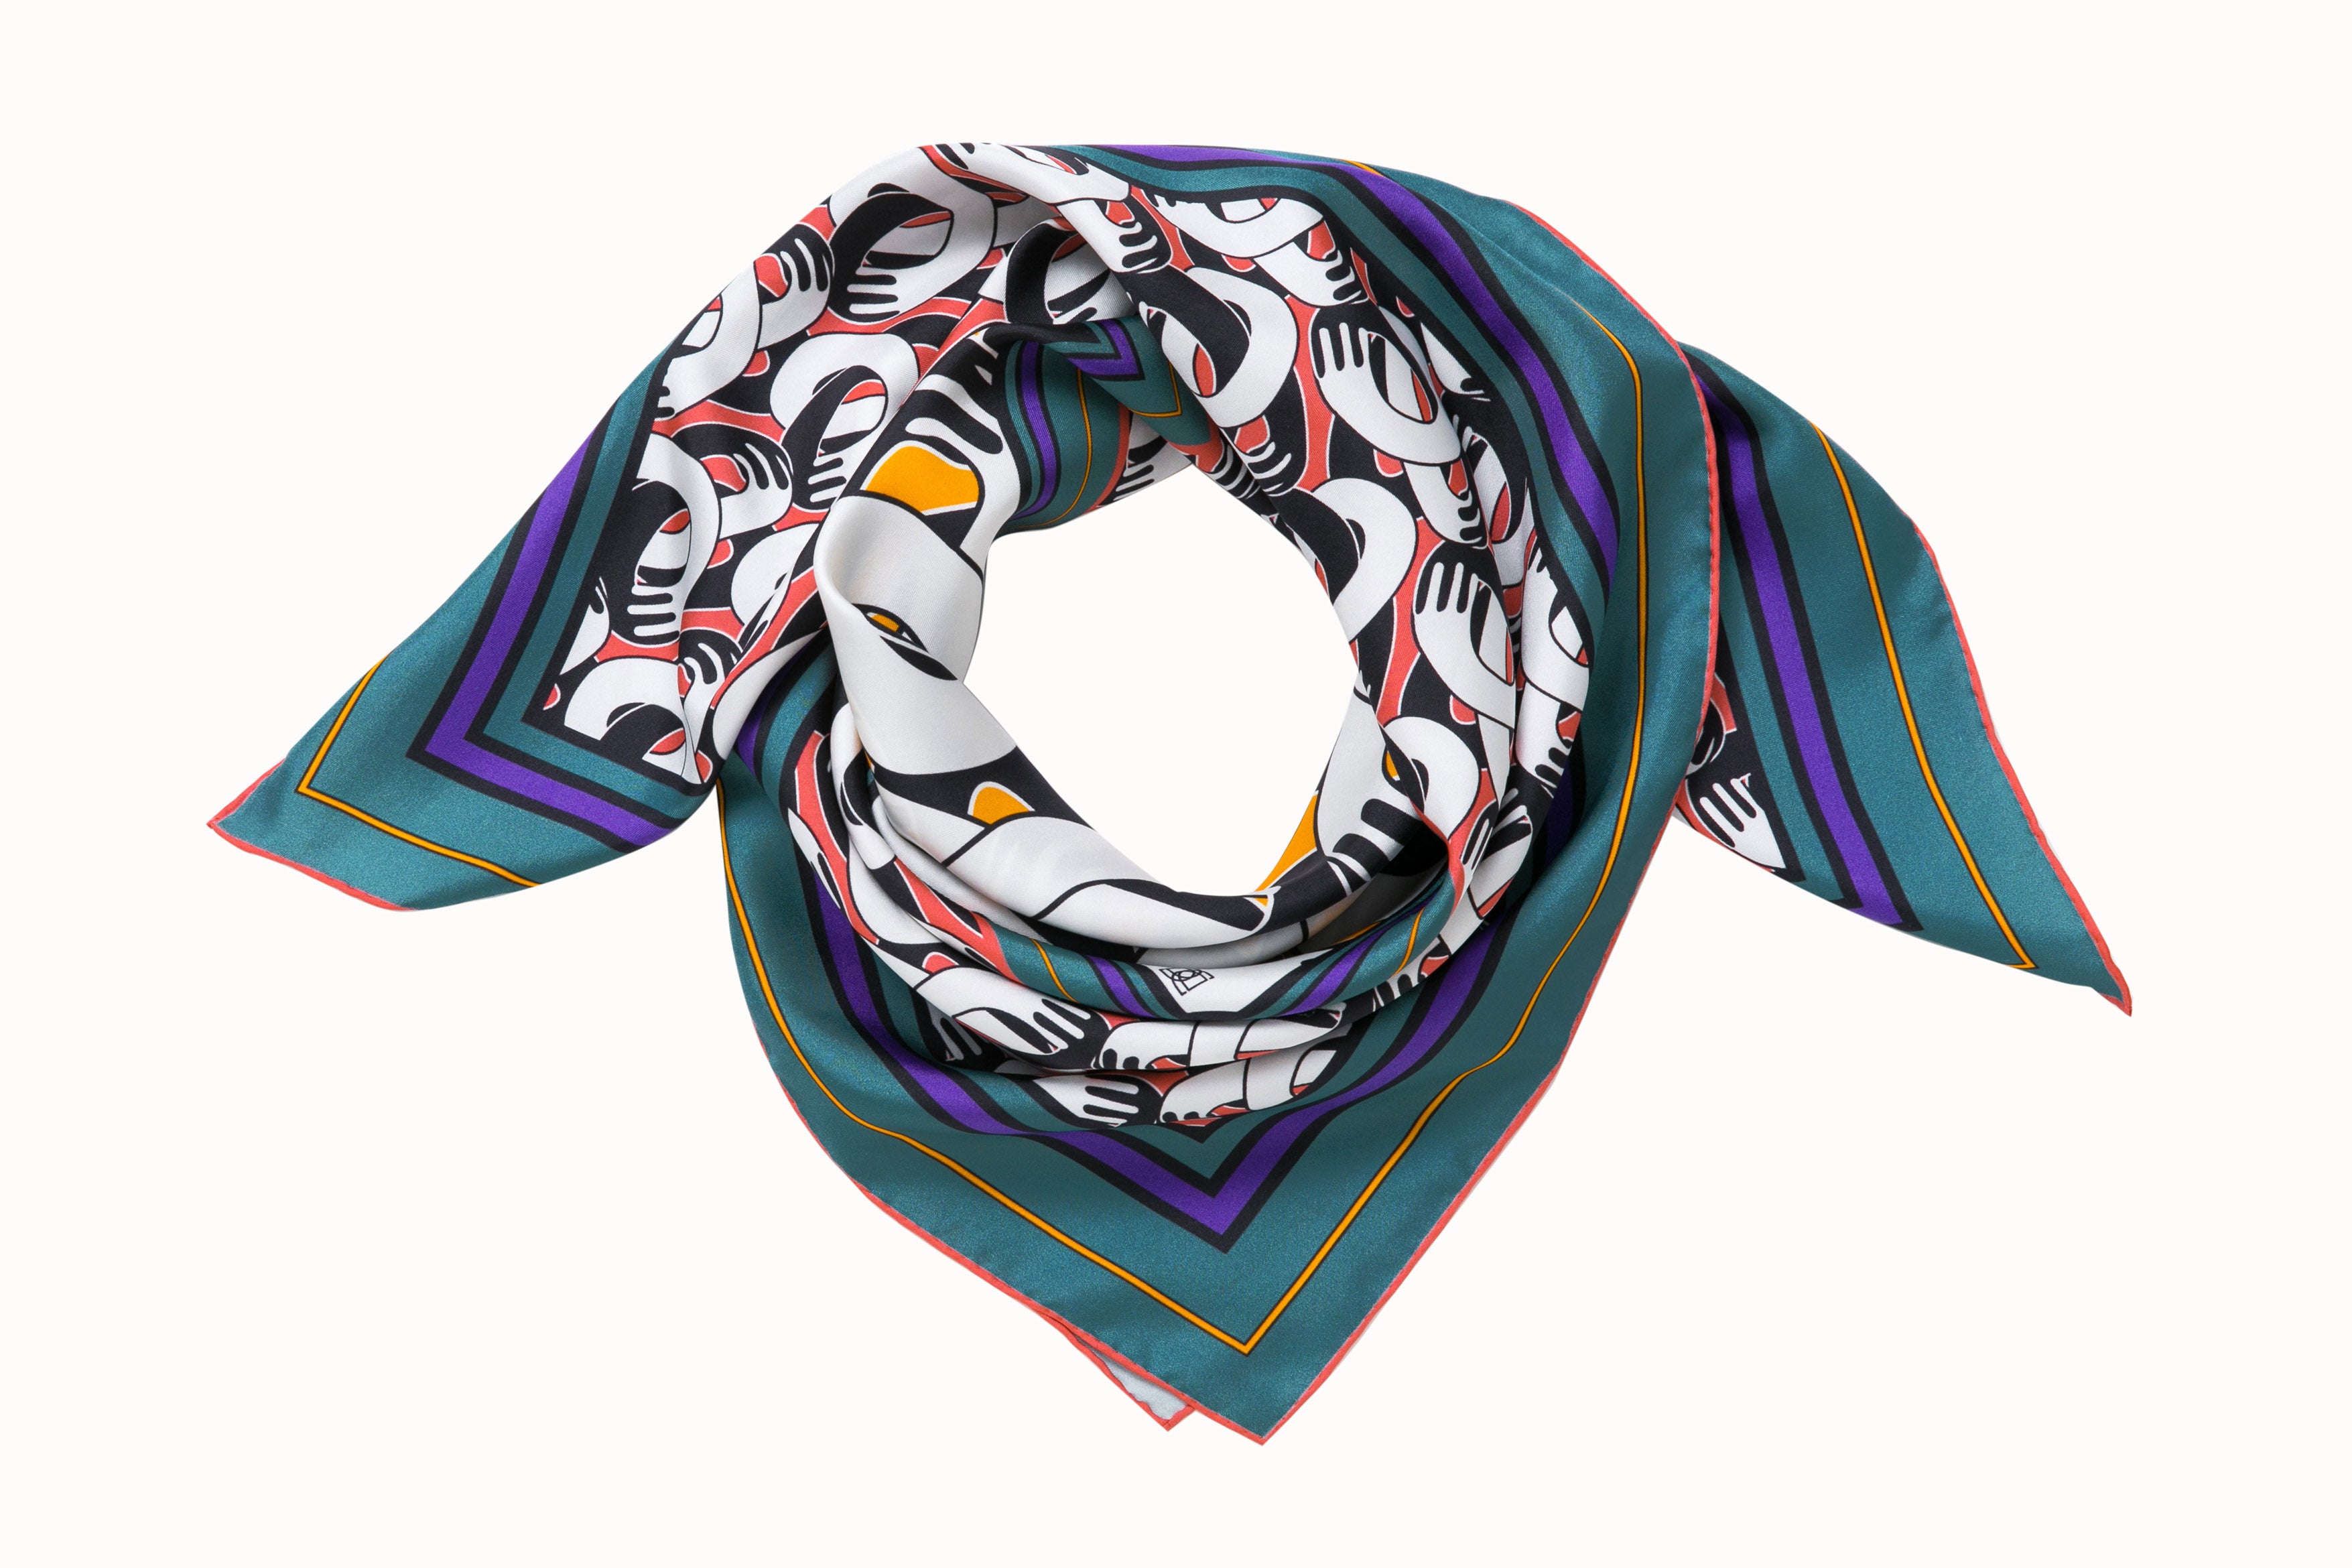 Rolled image of 100% silk square scarf featuring a motif of black and white intertwined hands. The larger scale hands motif in the center is on a pumpkin colored background and is surrounded by smaller scale hands on a pink coral colored background. The scarf has a green and purple border.